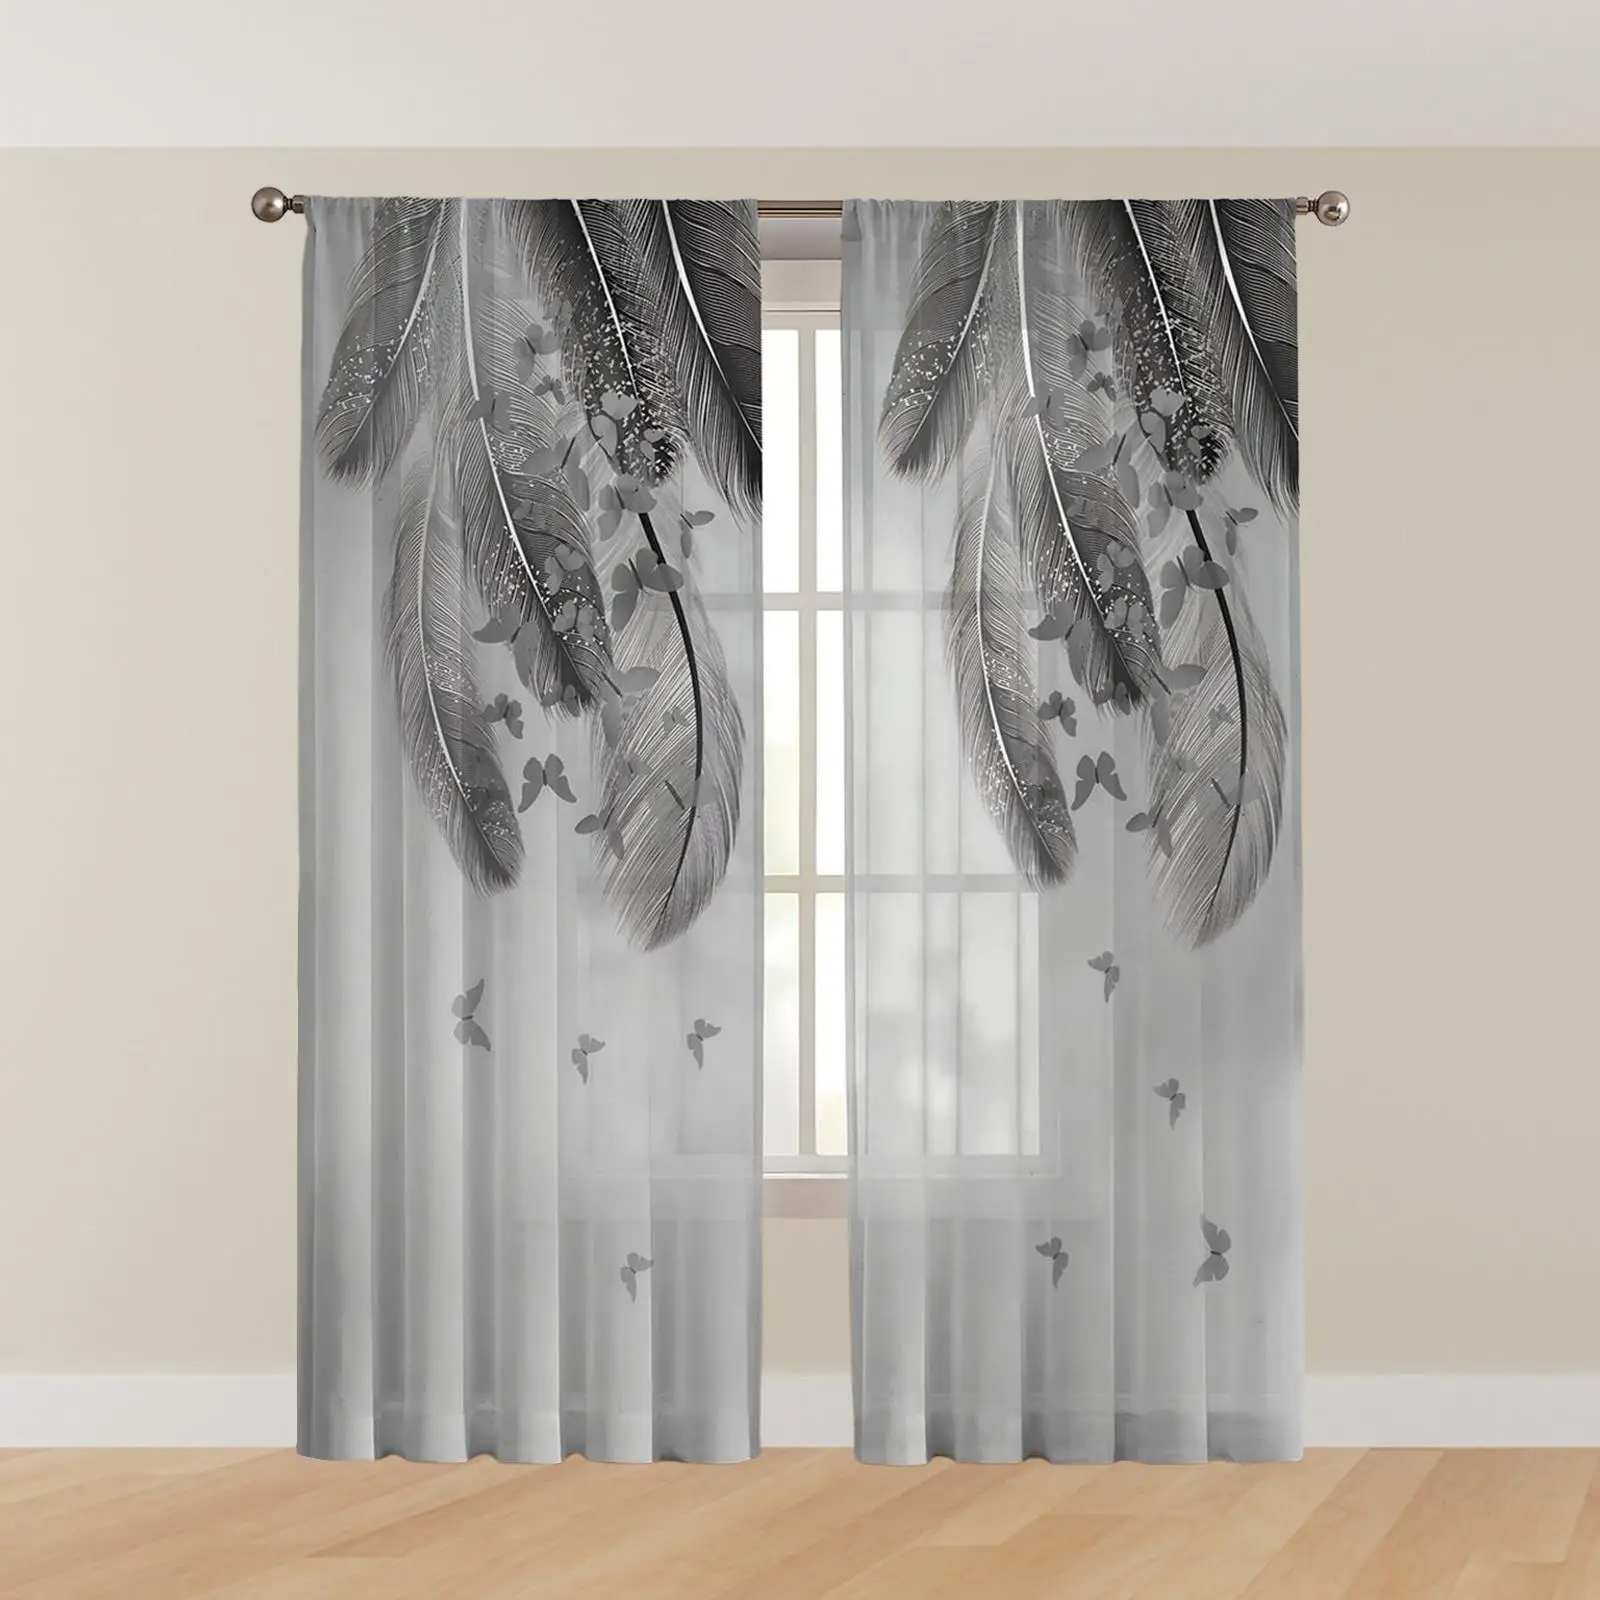 Window Tulle Curtains Versatile Elegant Modern Semi Sheer Voile Window Curtains for Study Office Living Room Patio